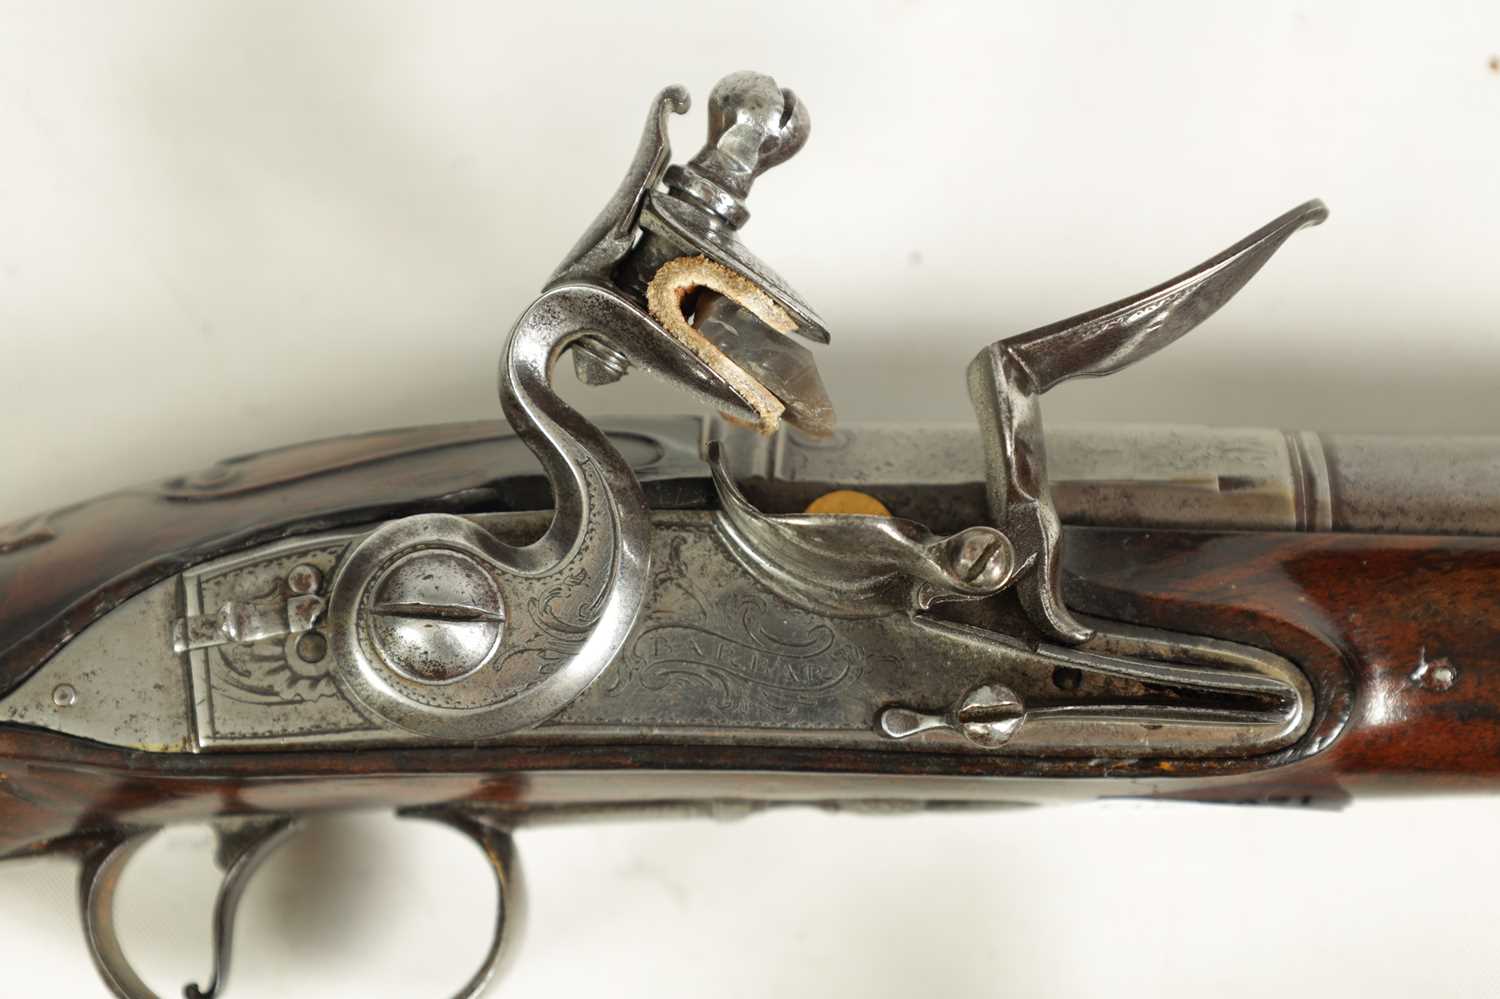 A PAIR OF 18TH CENTURY SILVER-MOUNTED ENGLISH FLINTLOCK PISTOLS BY BARBAR, LONDON. - Image 2 of 17